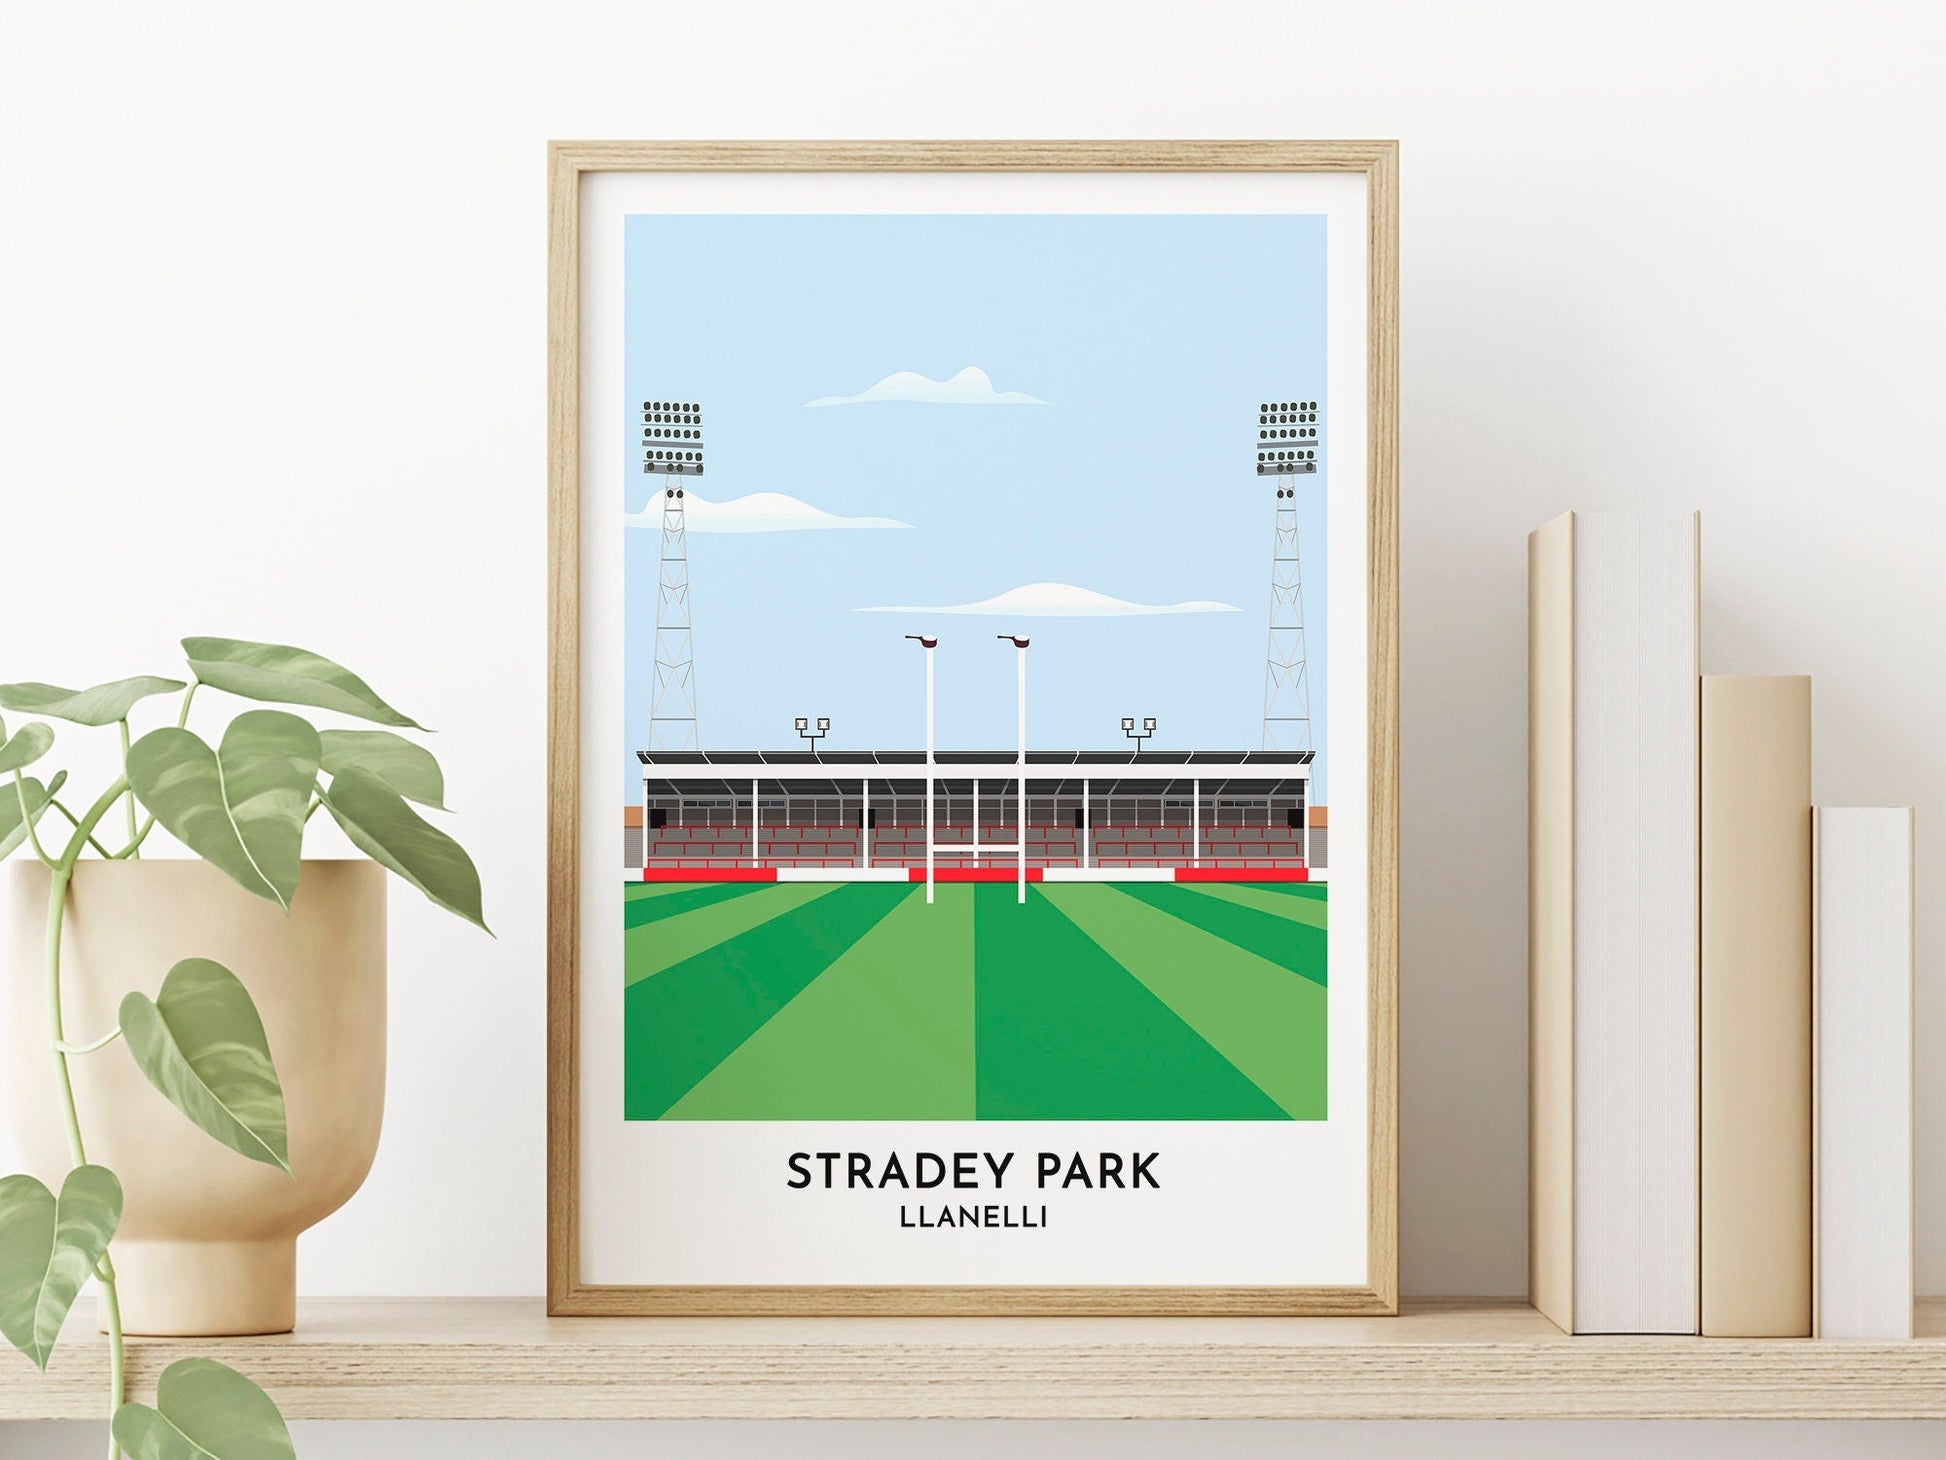 Llanelli RFC former Stadium Stradey Park Memento Print Gift, Gifts for Wales Rugby Union Fans - Turf Football Art